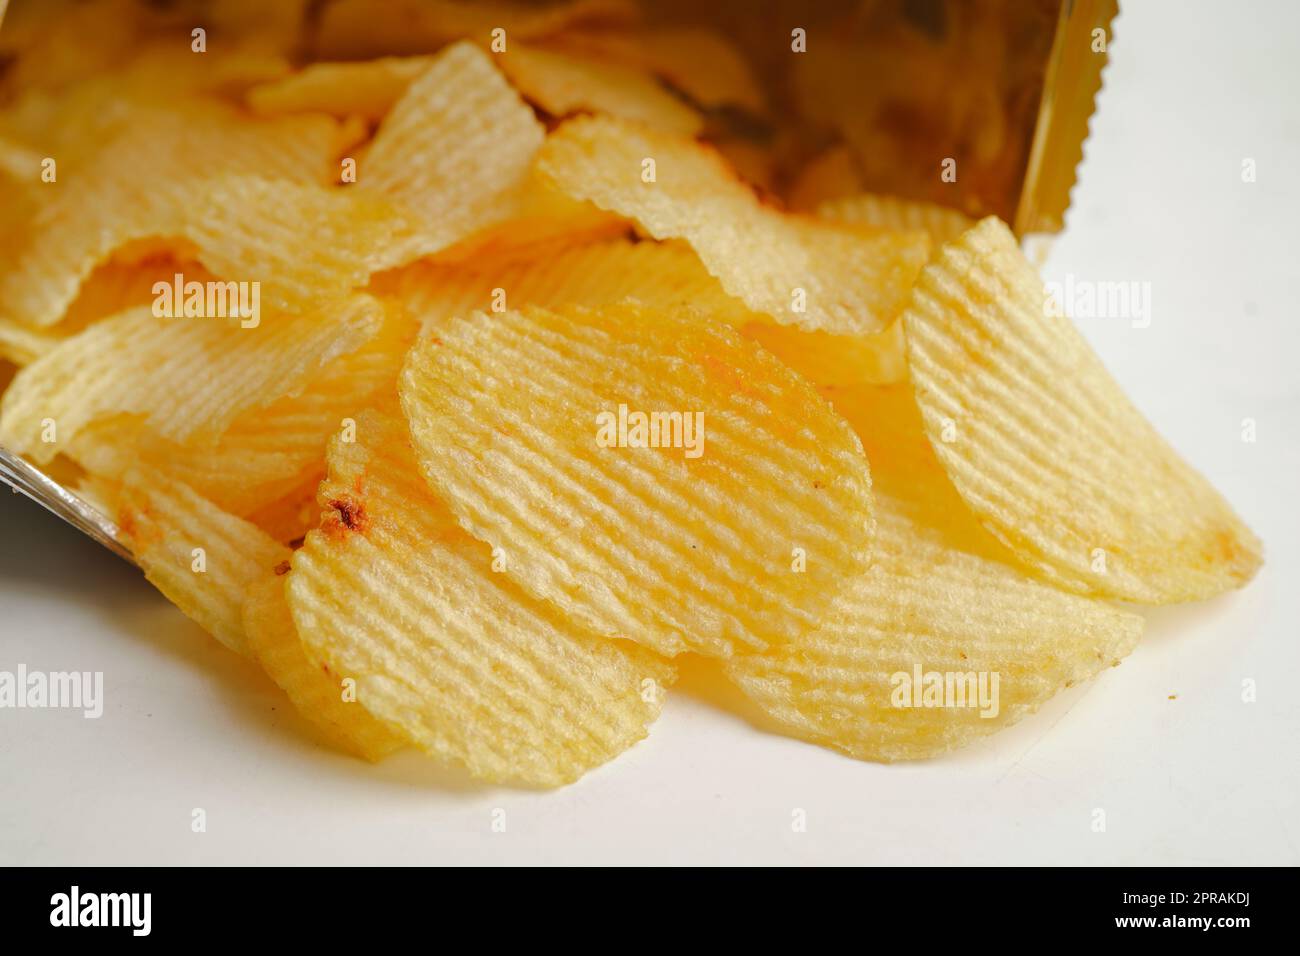 Potato chips in open bag, delicious BBQ seasoning spicy for crips, thin slice deep fried snack fast food. Stock Photo